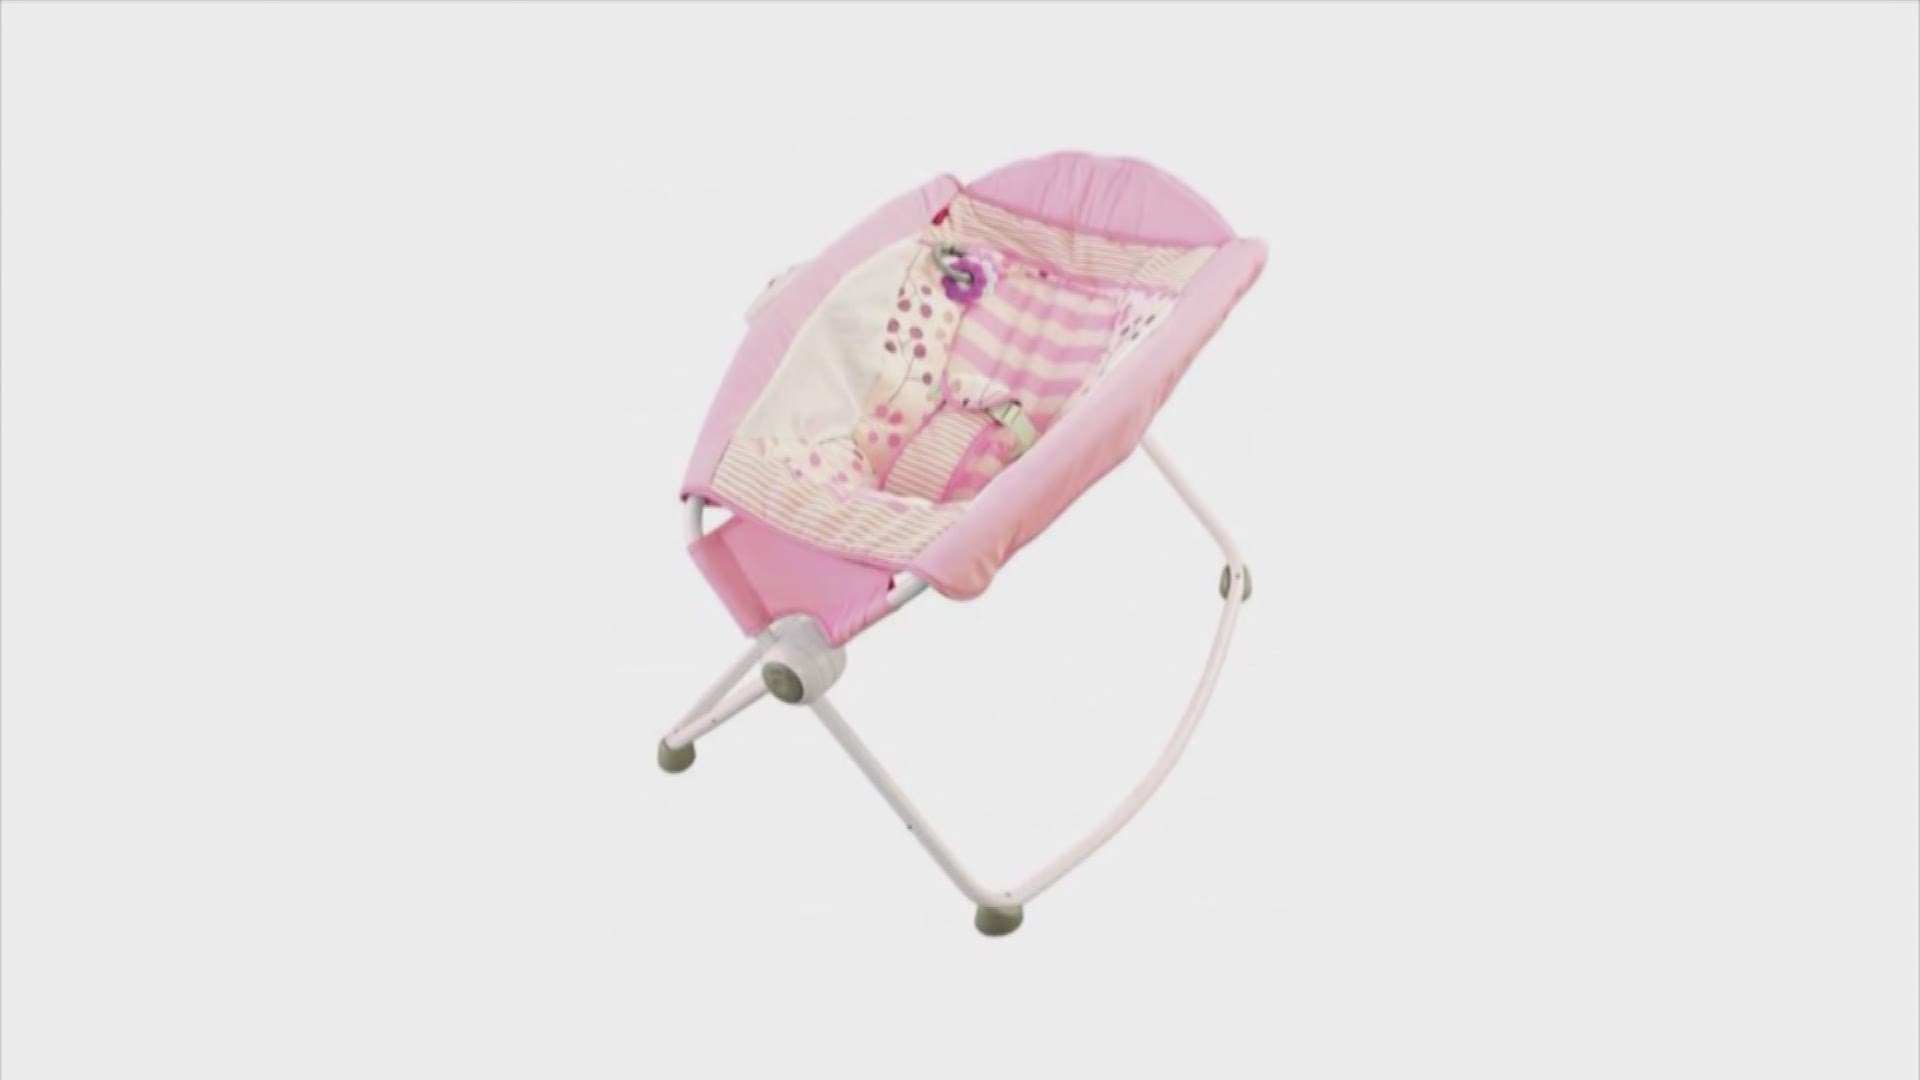 Fisher-Price is recalling nearly 5 million infant sleepers after more than 30 babies rolled over in them and died since the product was introduced in 2009.